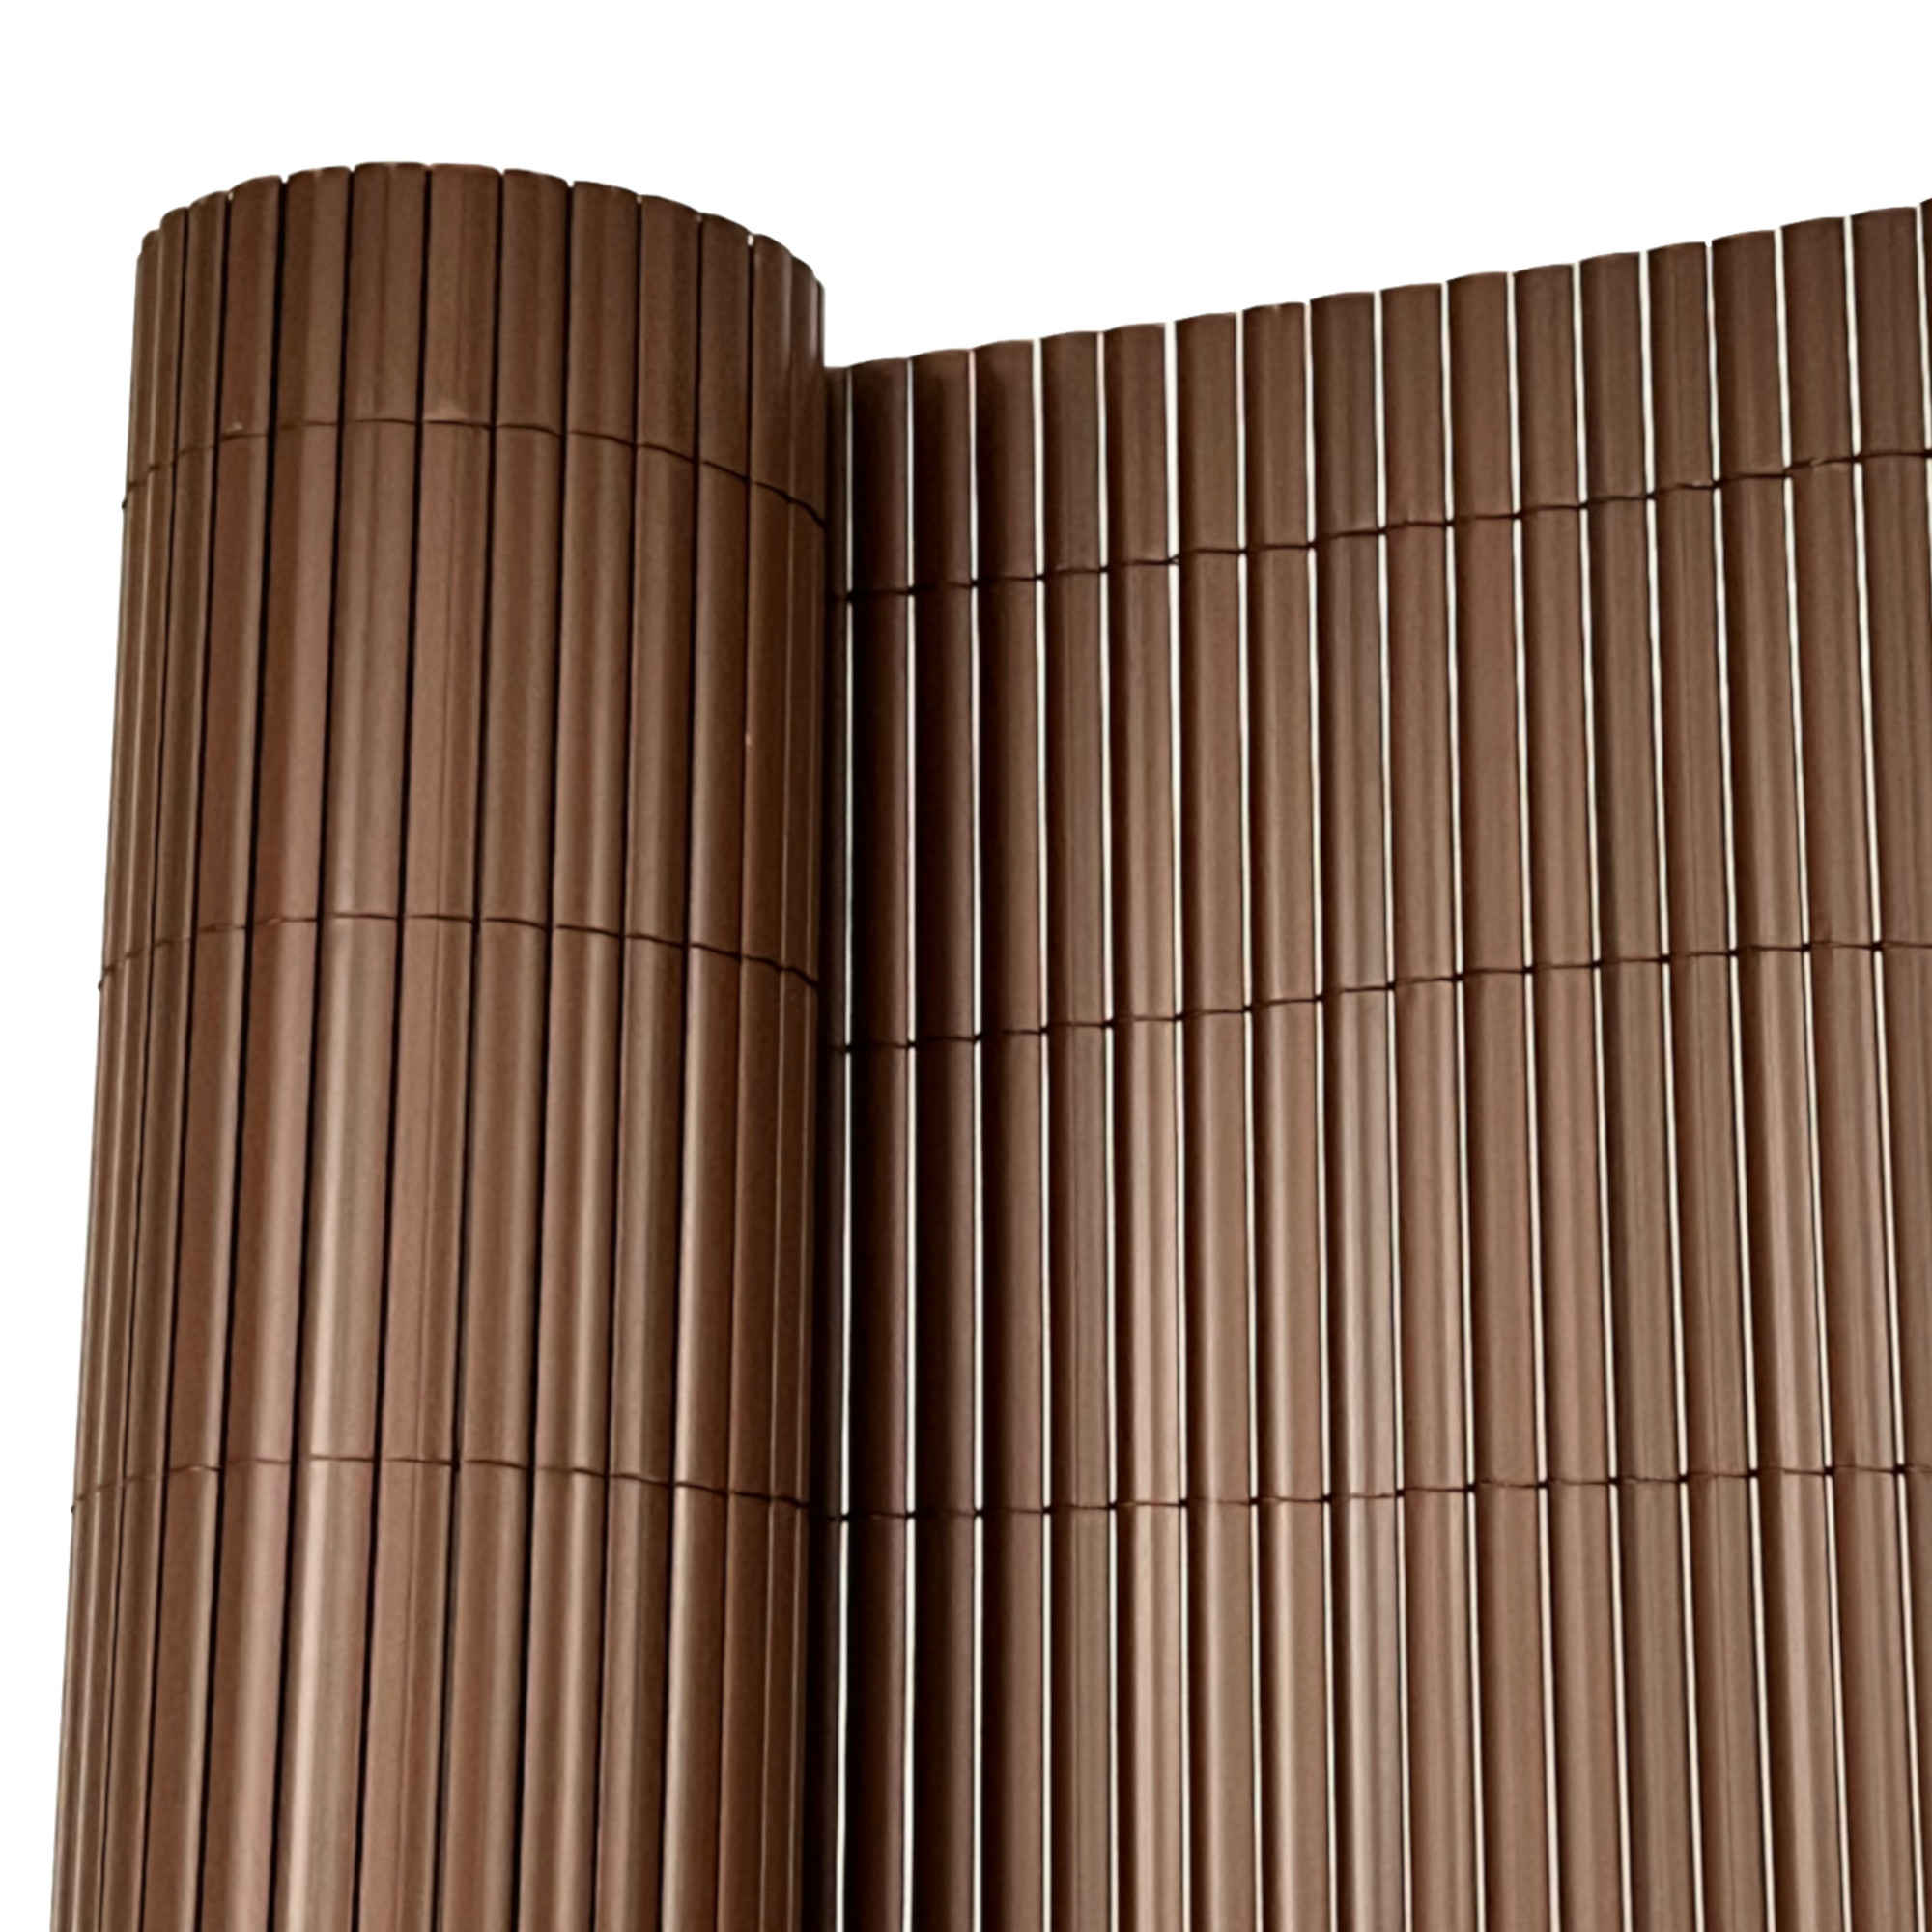 4m x 1.2m PVC Fencing (Brown) - Click Image to Close